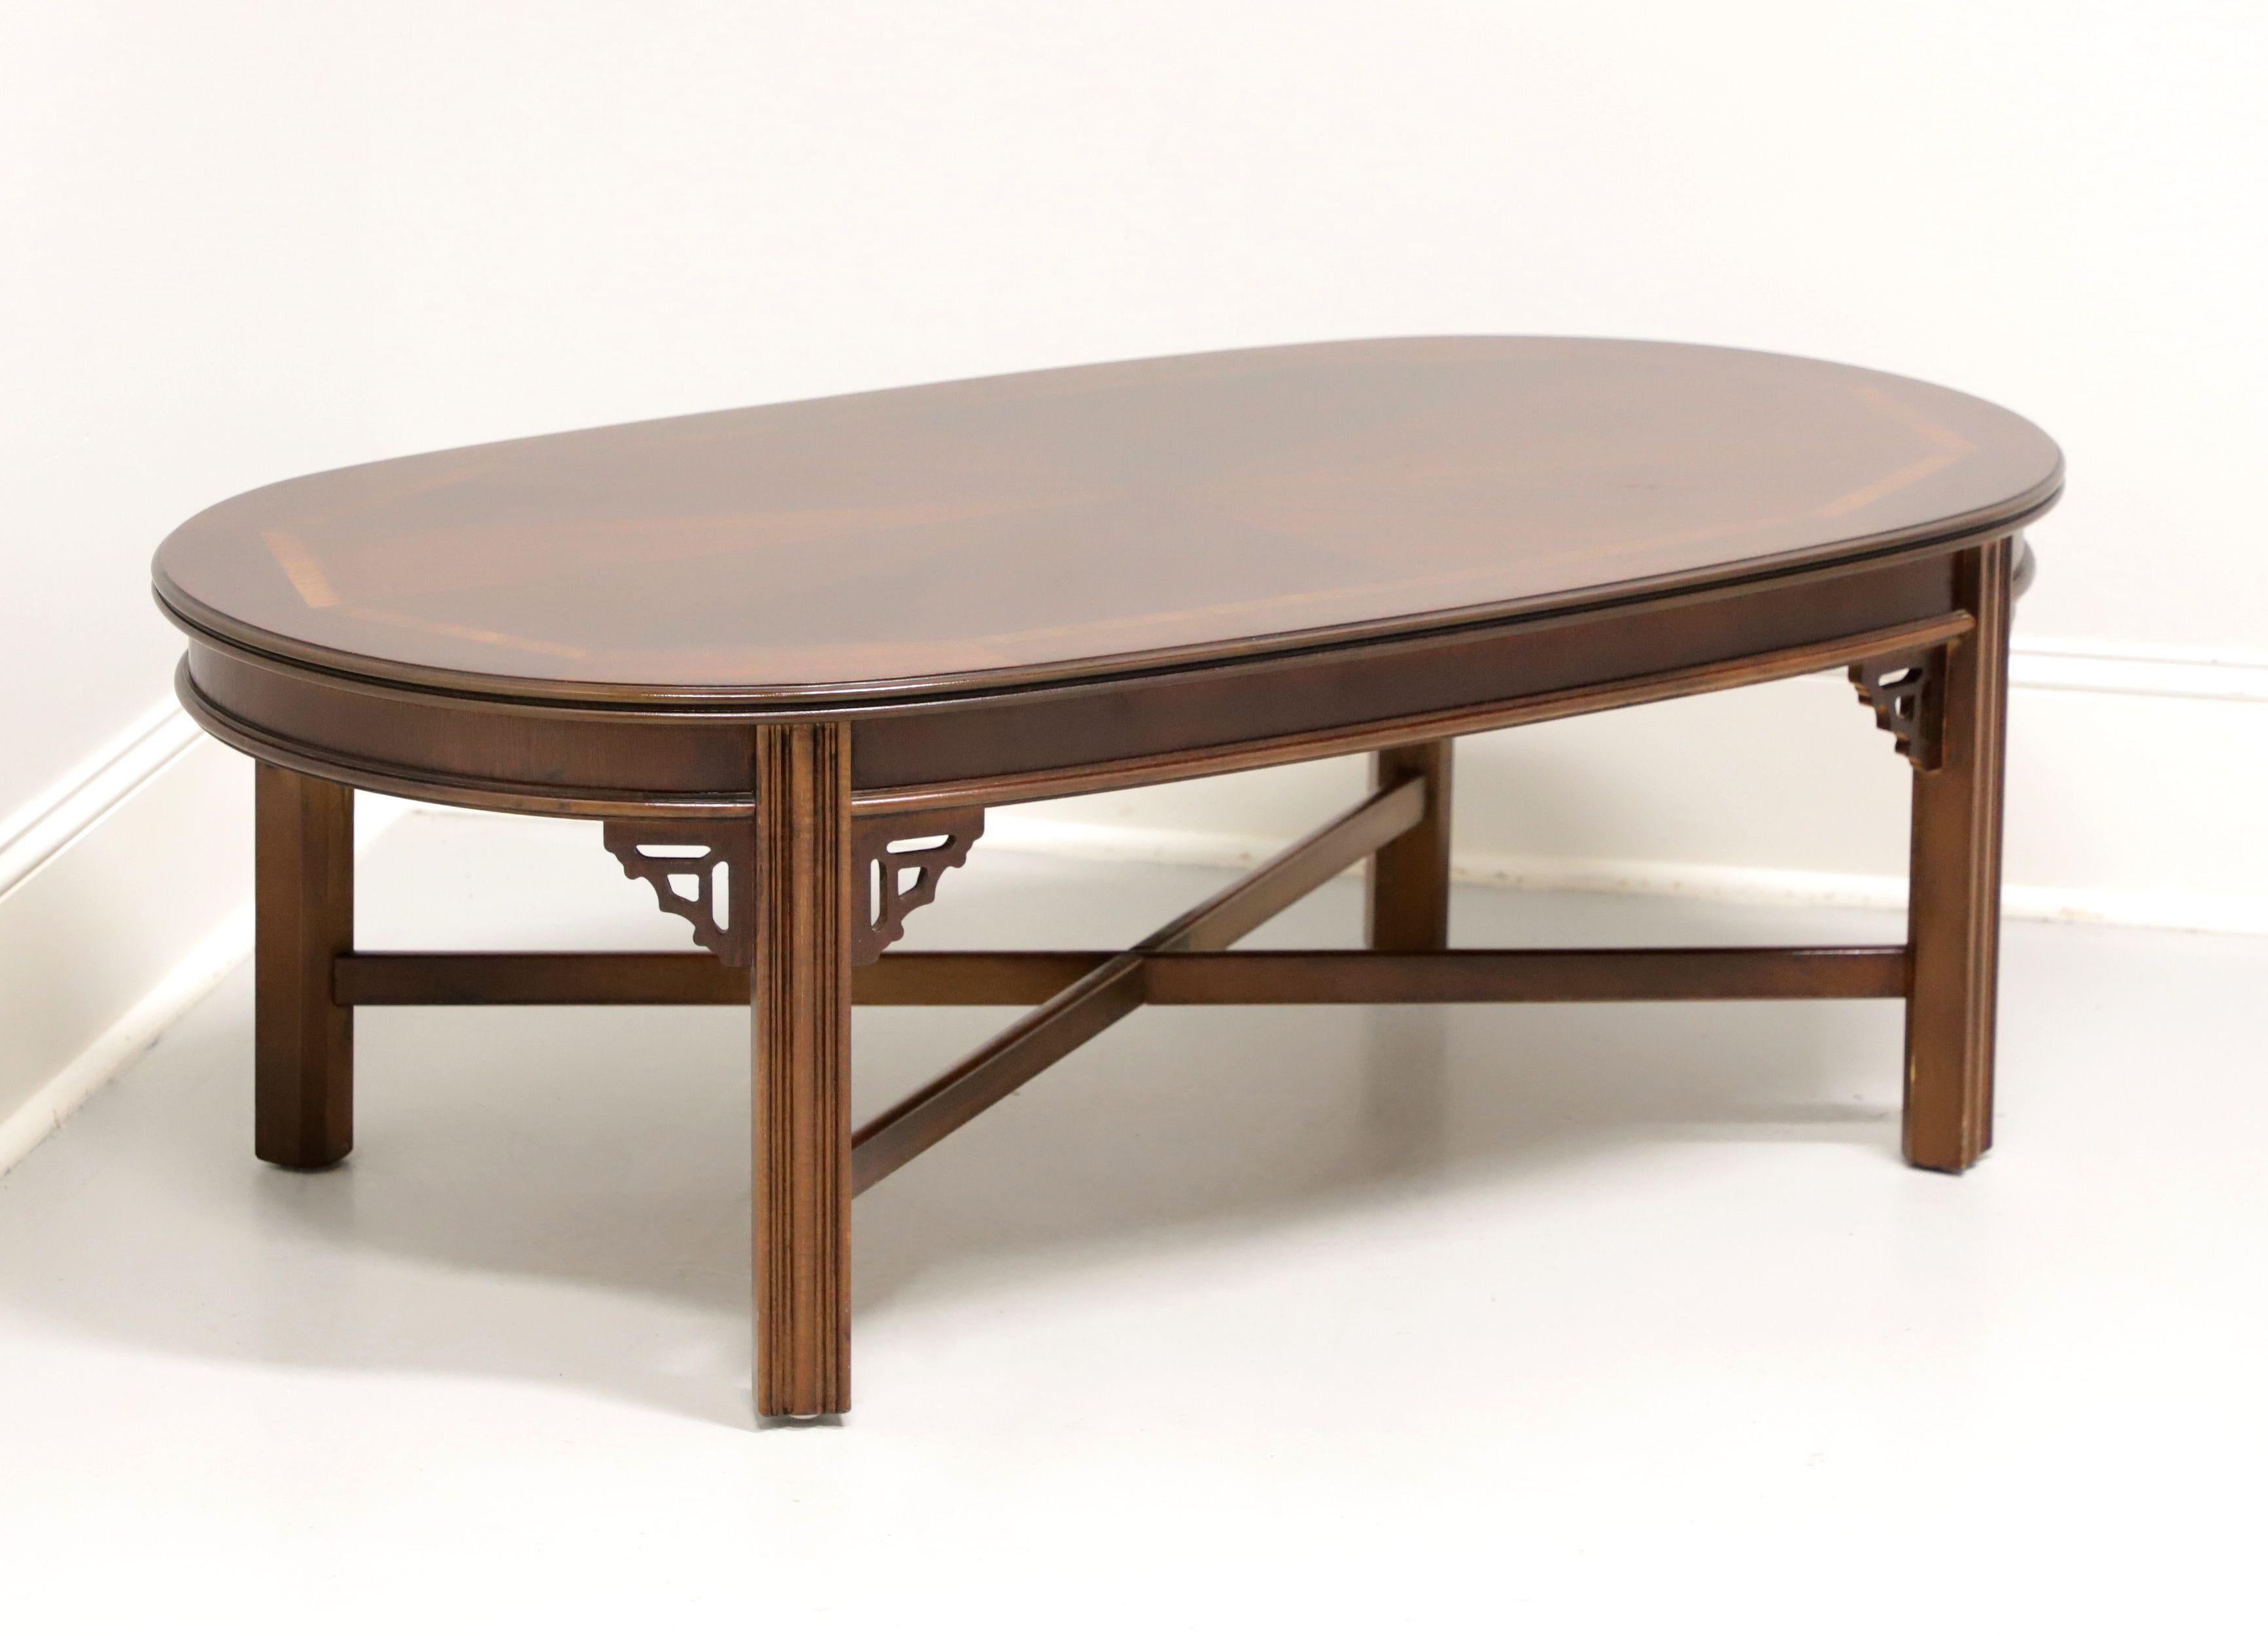 A Chippendale style oval shaped coffee table by Lane Furniture. Mahogany with inlaid & banded top, bevel edge apron, fretwork accents to corner joints, stretchers, and fluted straight legs. Made in Altavista, Virginia, USA, in the late 20th